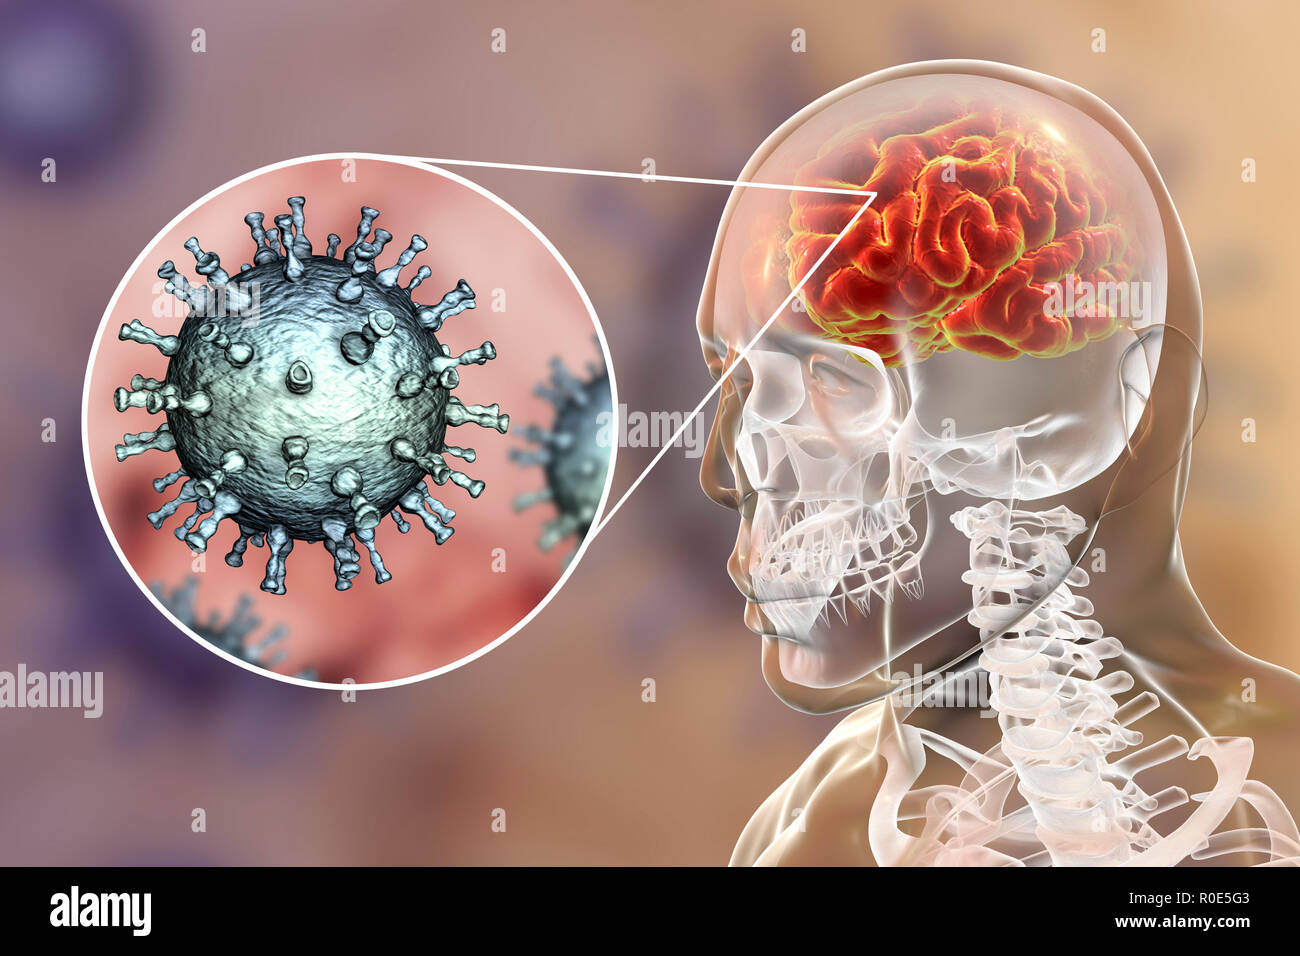 Encephalitis caused by varicella zoster virus (VZV), computer illustration. VZV, a virus from the Herpesviridae family, is the causative agent of chickenpox and shingles. Encephalitis (inflammation of the brain) is one of complications of chickenpox infection. Stock Photo